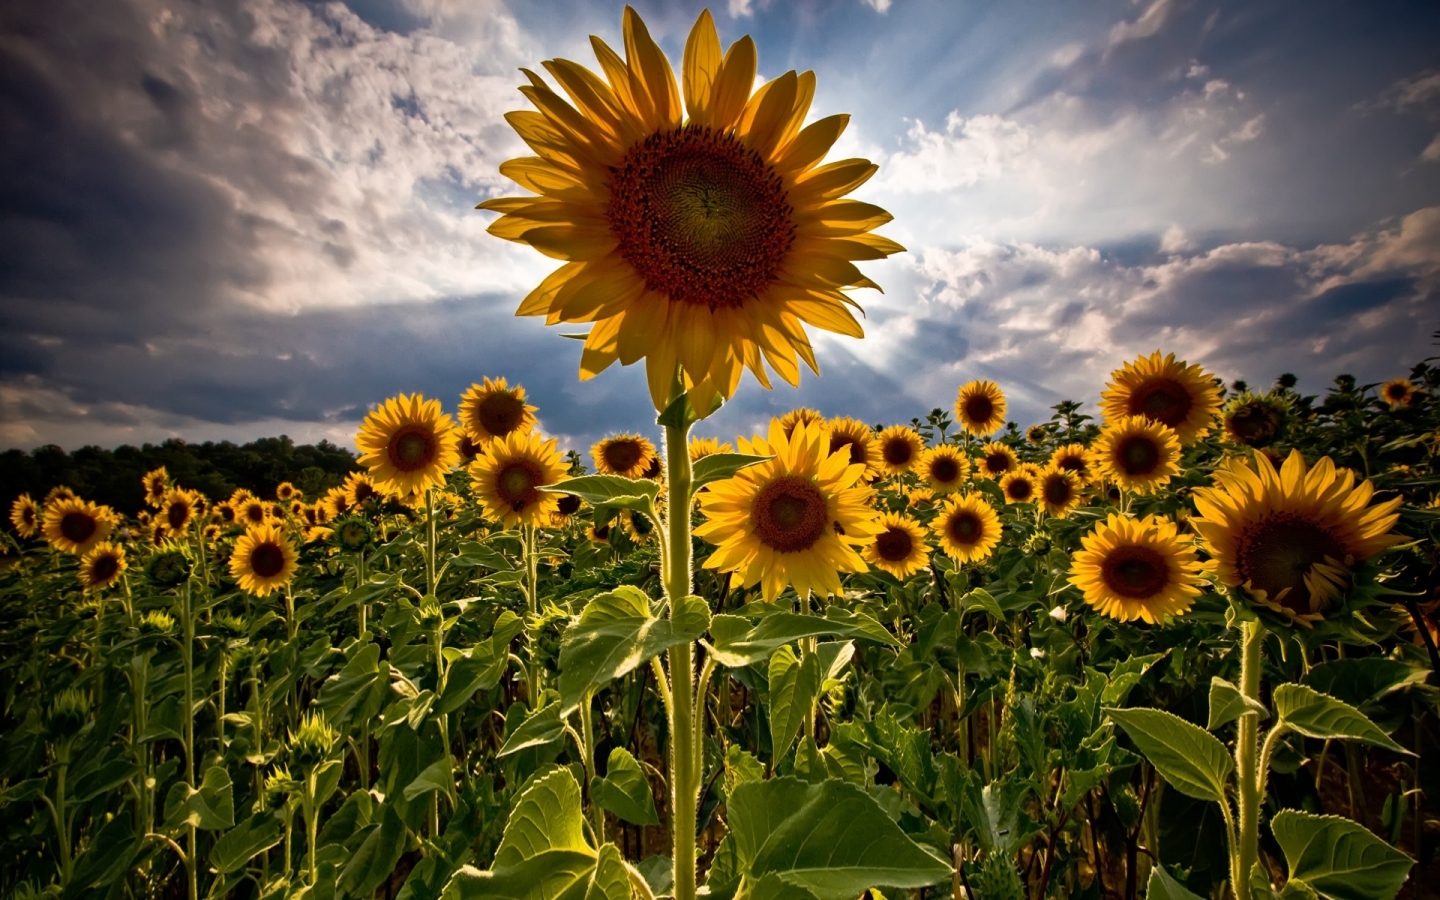 Amazing Sunflowers for 1440 x 900 widescreen resolution